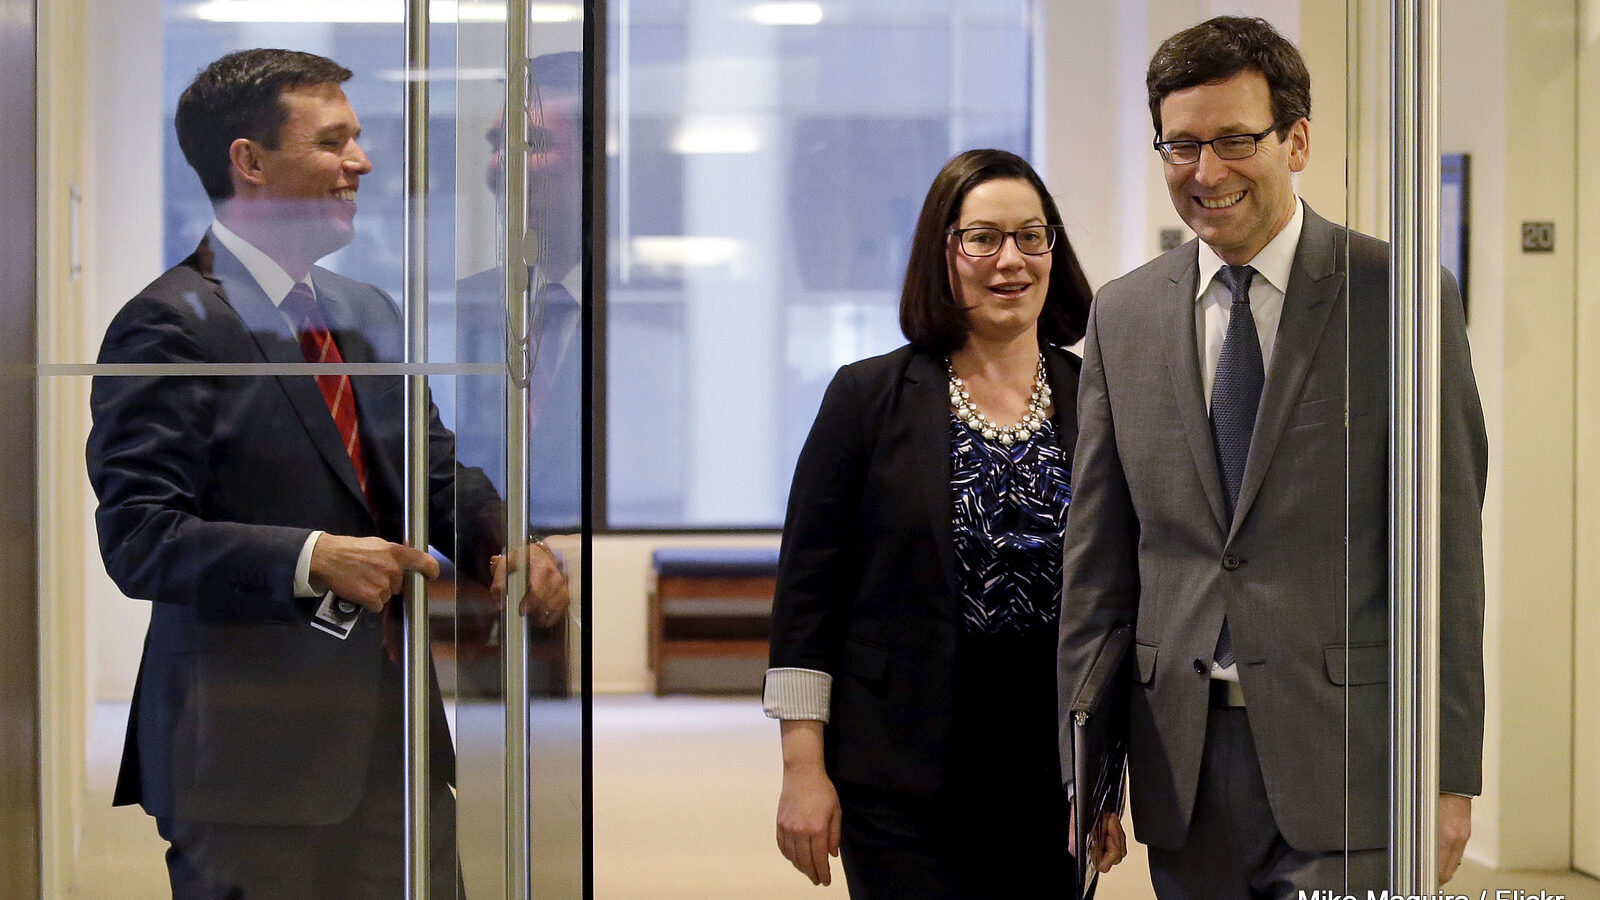 Washington State Attorney General Bob Ferguson, right, arrives for a news conference about the state's response to President Trump's revised travel ban with Solicitor General Noah Purcell, left, and Civil Rights Unit Chief Colleen Melody, Thursday, March 9, 2017, in Seattle. (AP/Elaine Thompson)